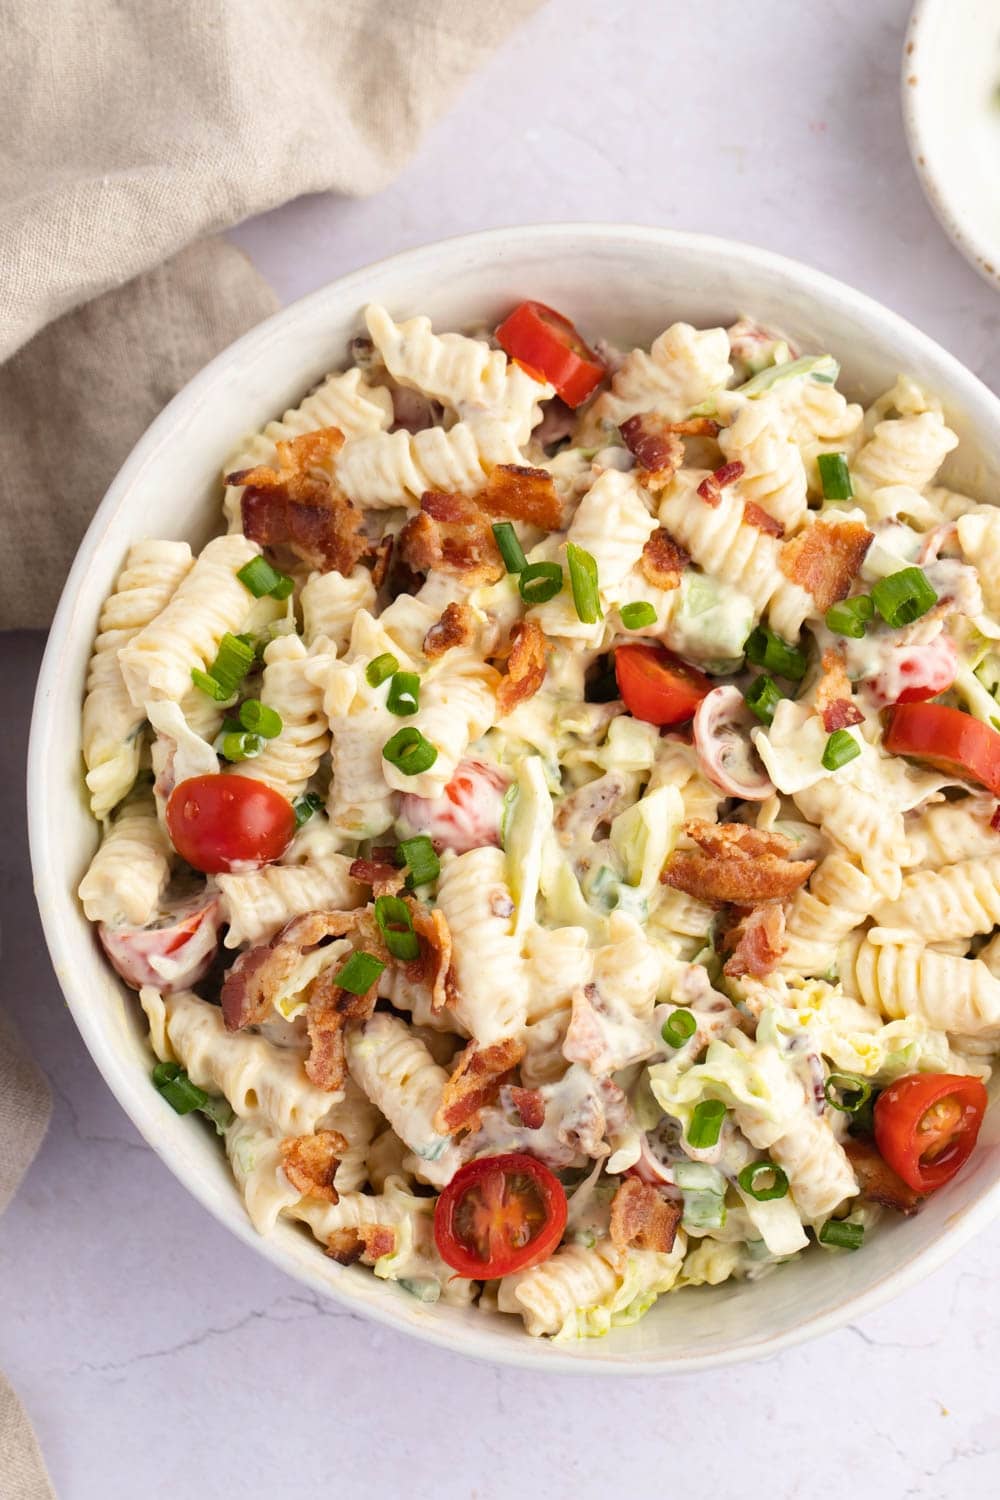 BLT Pasta Salad with Crispy Bacon, Tomatoes, Lettuce and Scallions